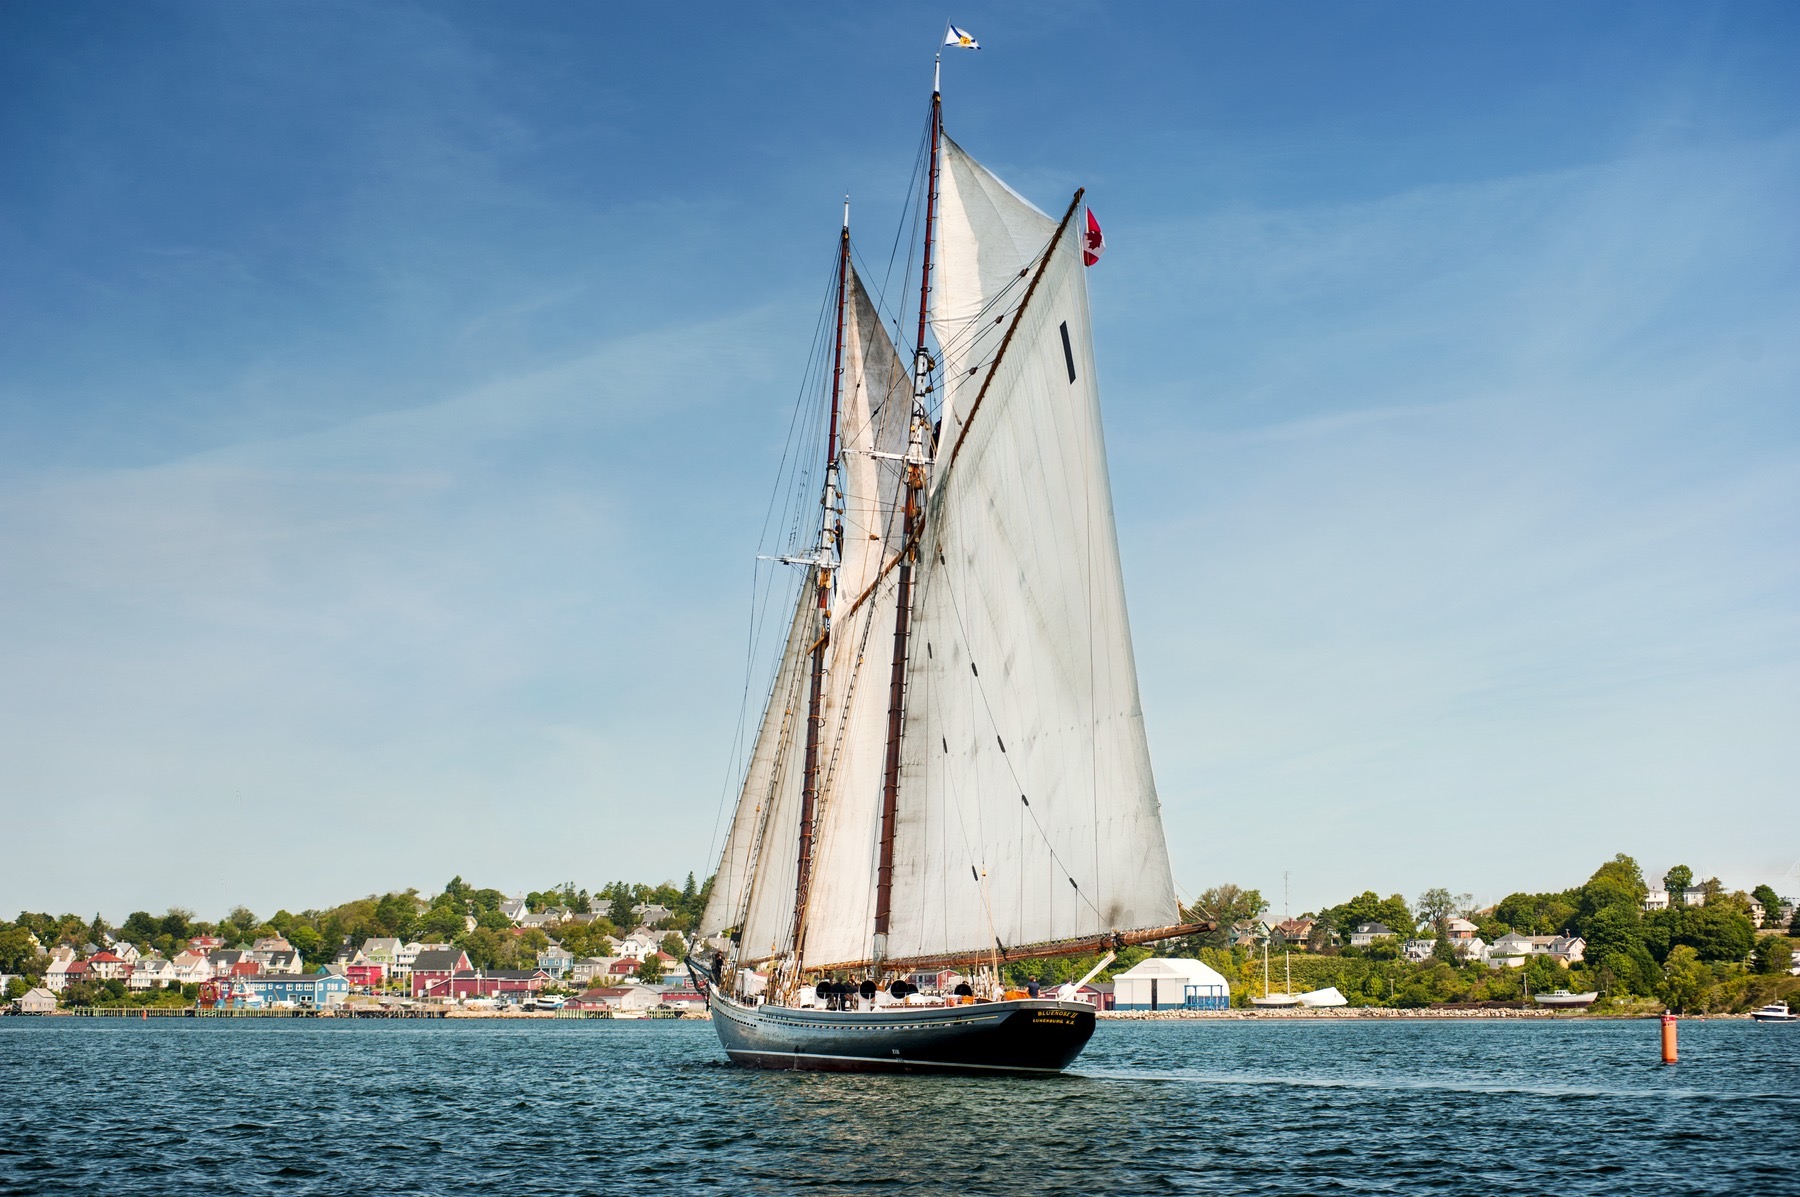 Canada’s most famous ship, the Bluenose